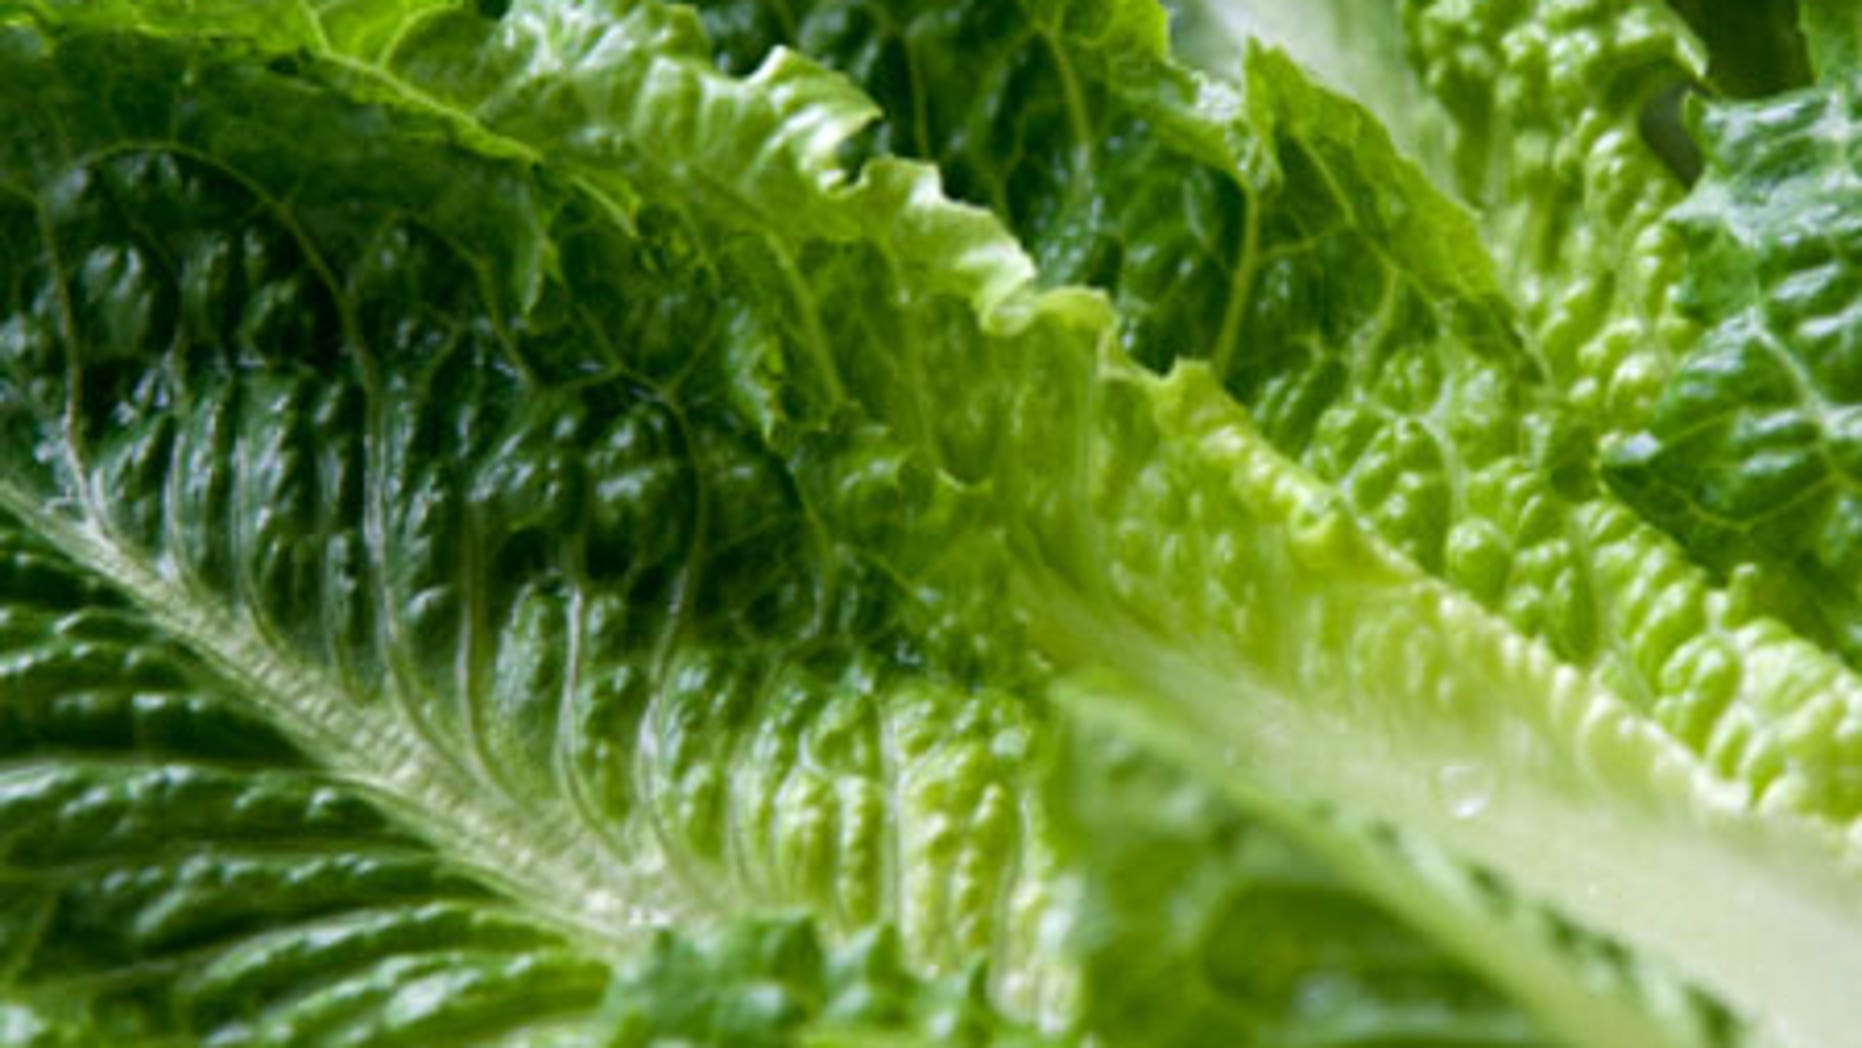 Bagged Lettuce Recalled by Dole Fox News